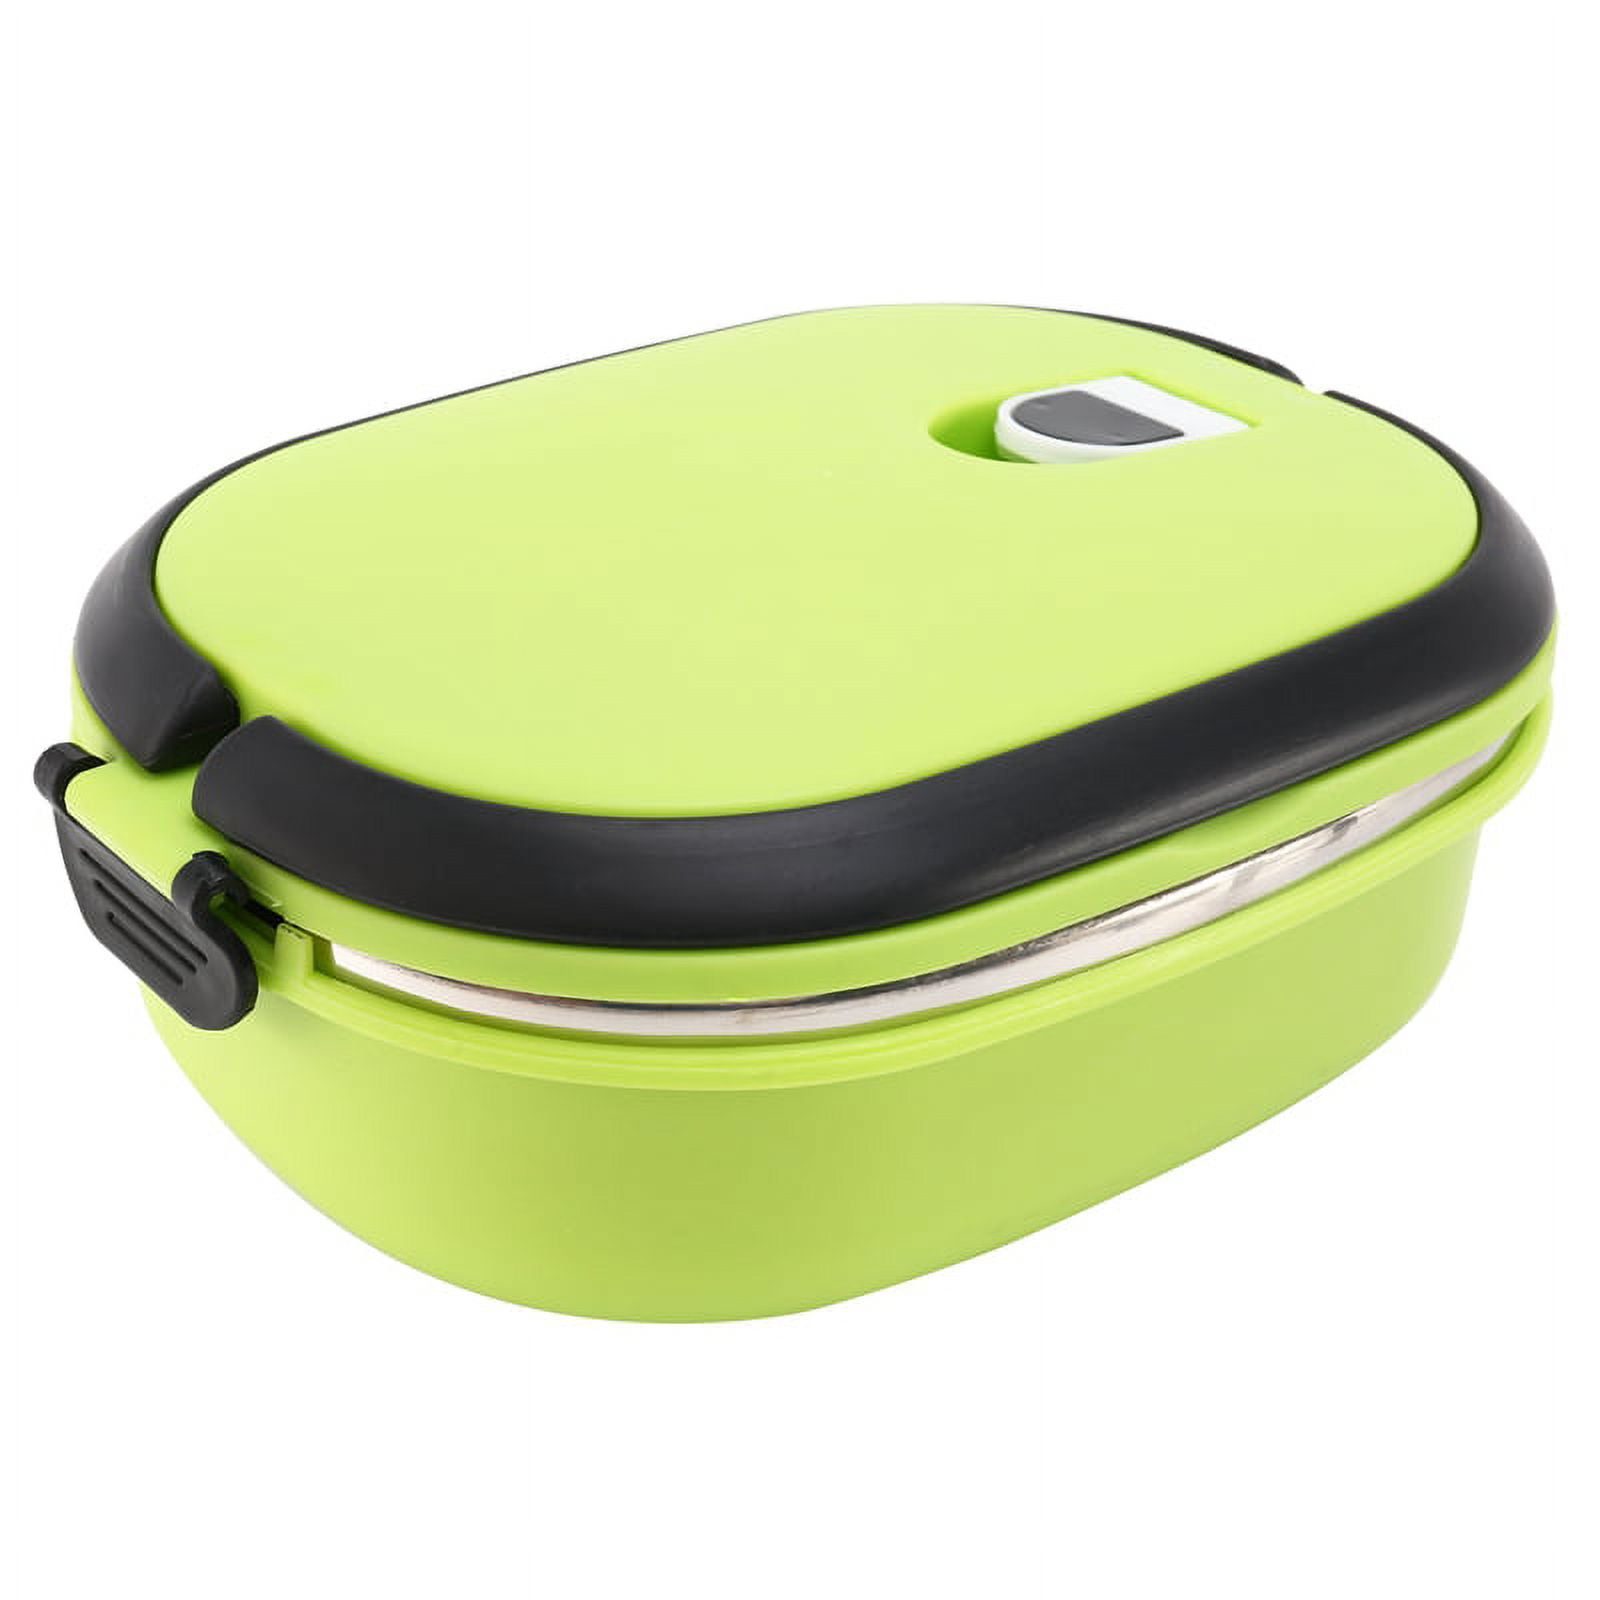 Buy Stainless Steel Thermal Lunch Box Food Container Food Thermos  Insulating Container by Just Green Tech on Dot & Bo